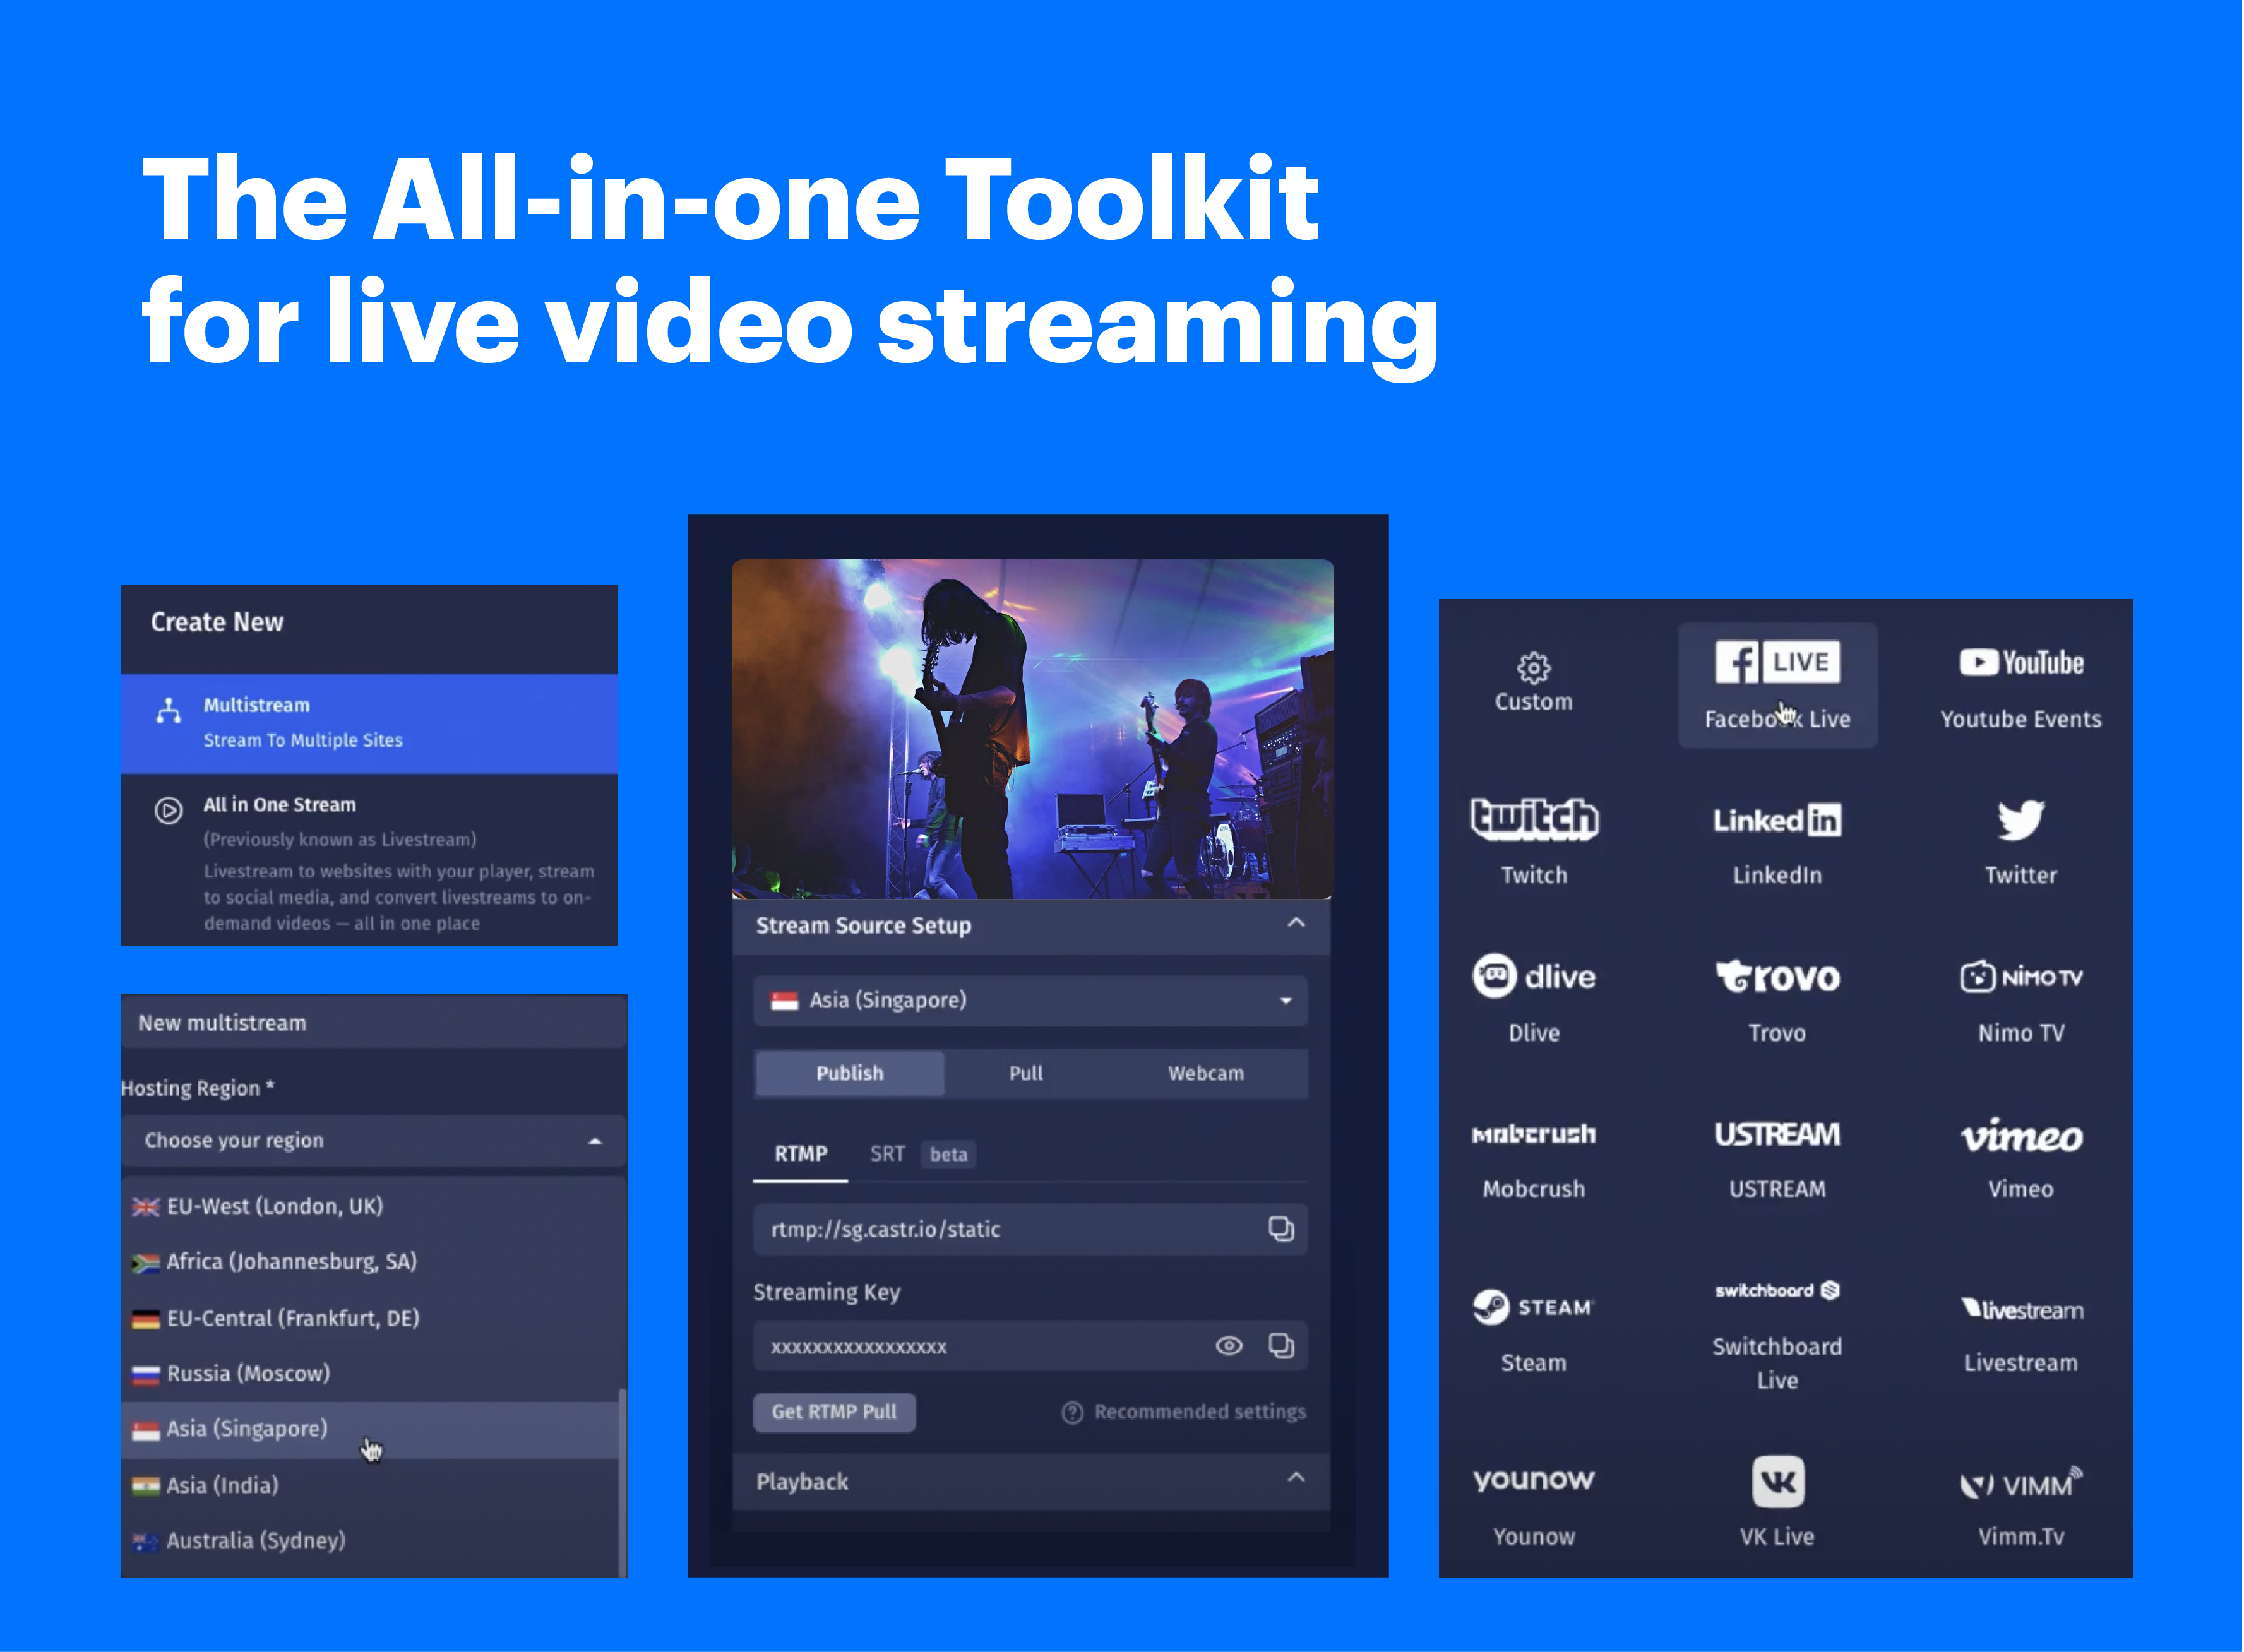 Castr is the all-in-one toolkit for live video streaming